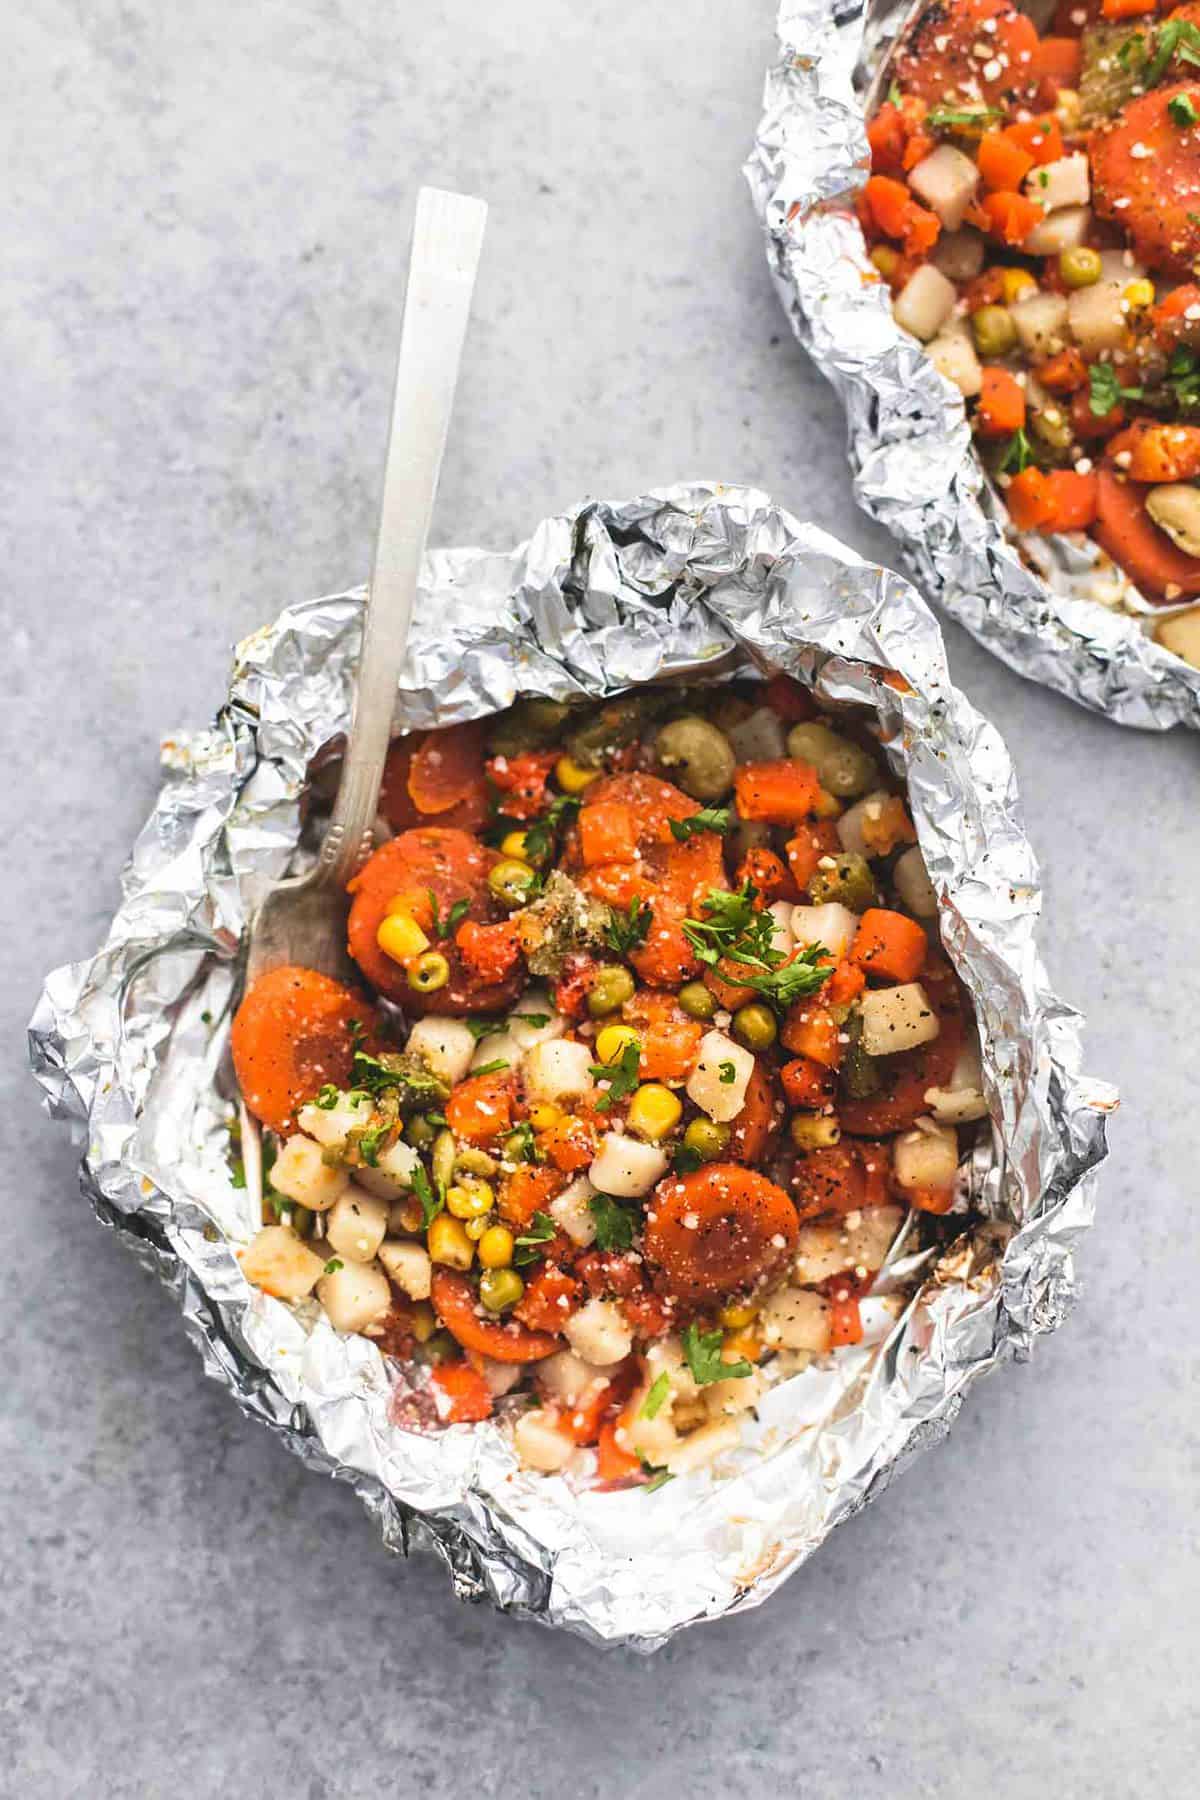 top view of a vegetable medley foil pack with a fork in it and another foil pack on the side.